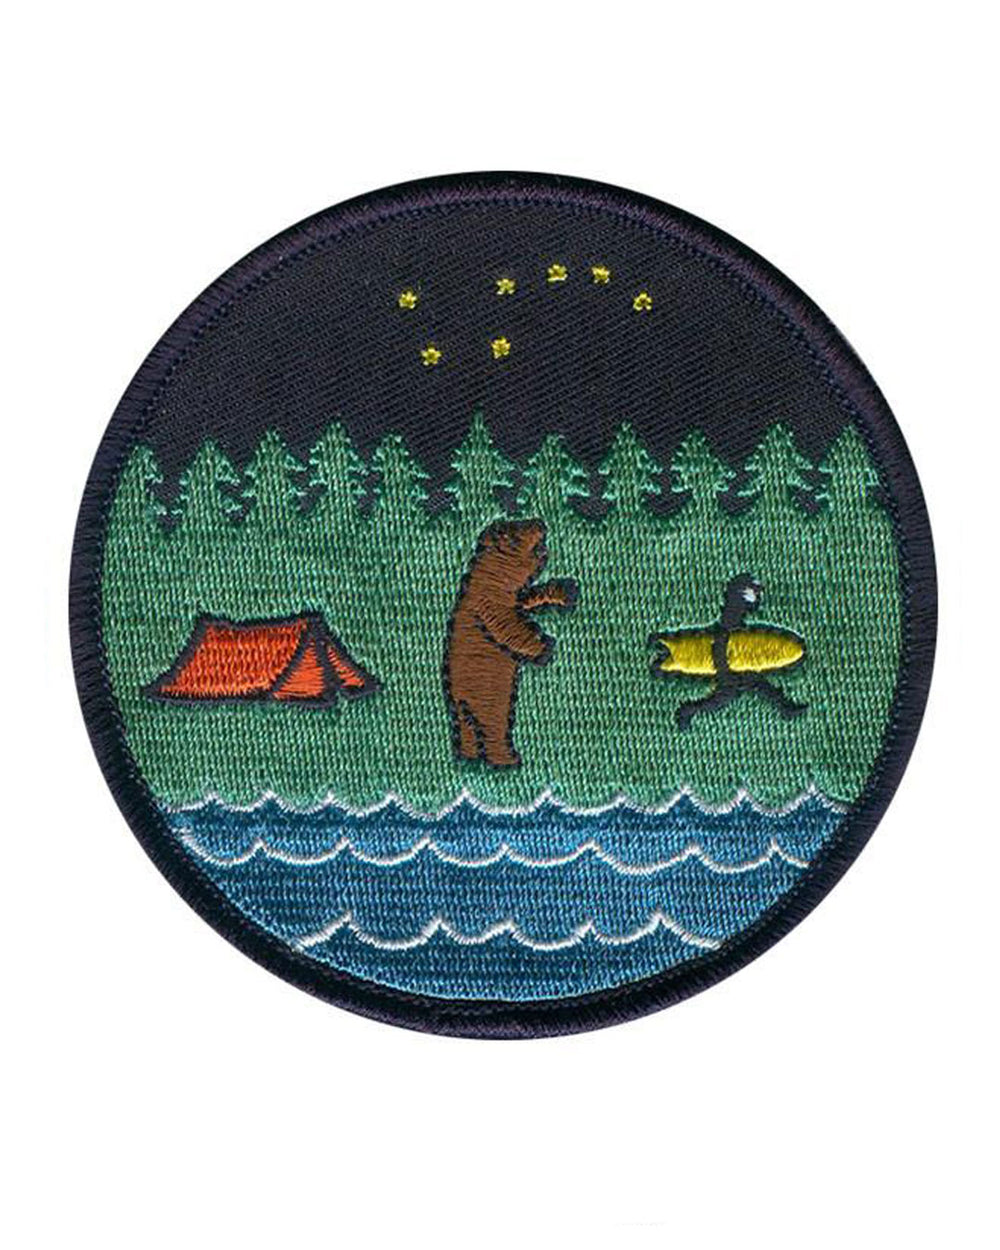 Bear Country Embroidered Patch